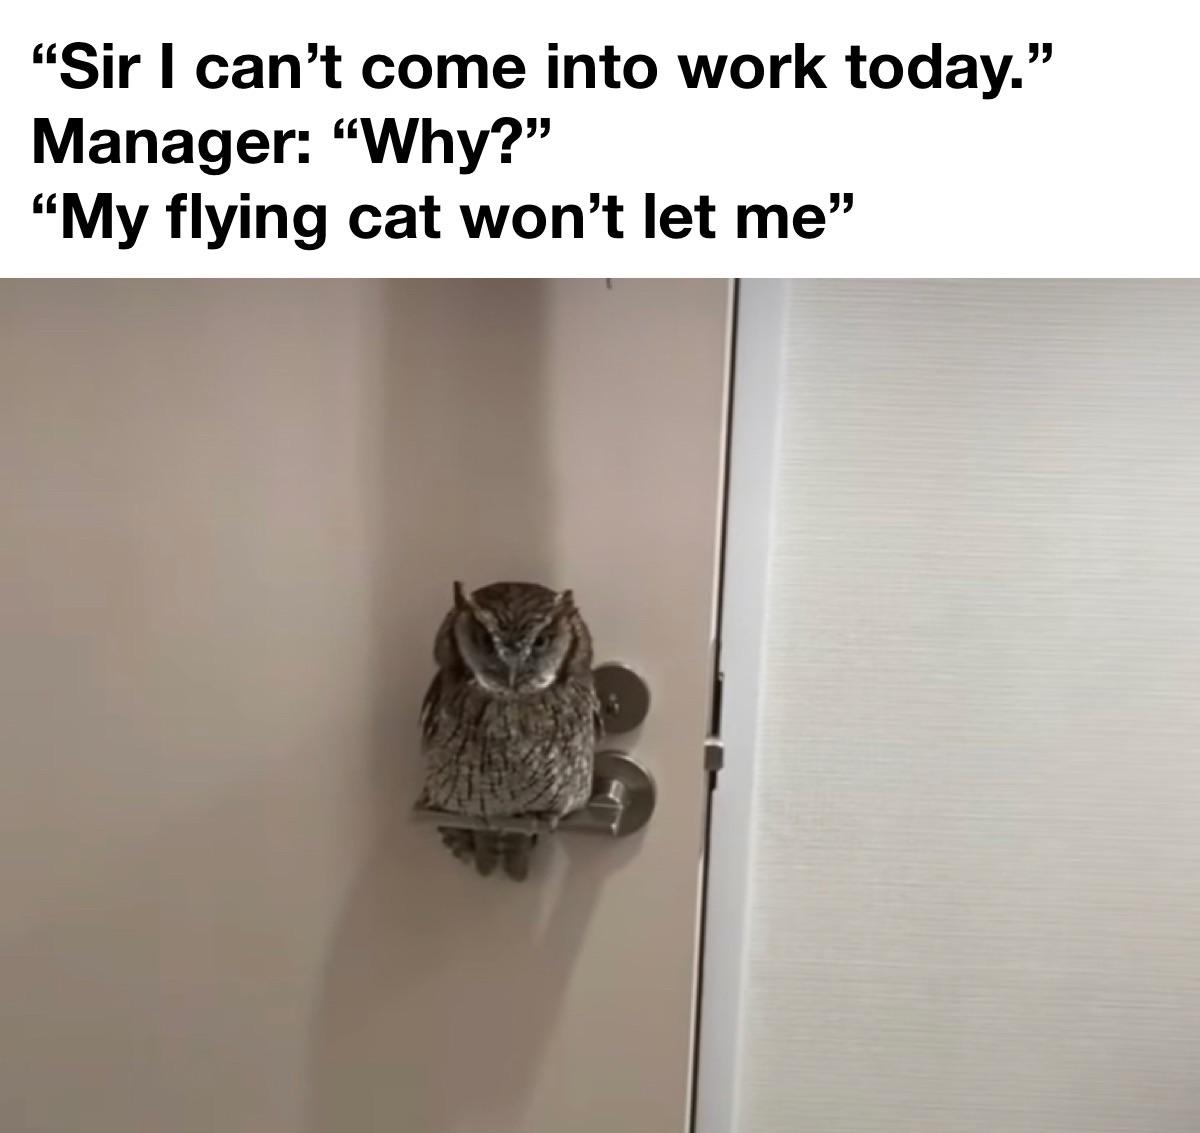 funny memes - royal mail special delivery - "Sir I can't come into work today." Manager "Why?" "My flying cat won't let me"